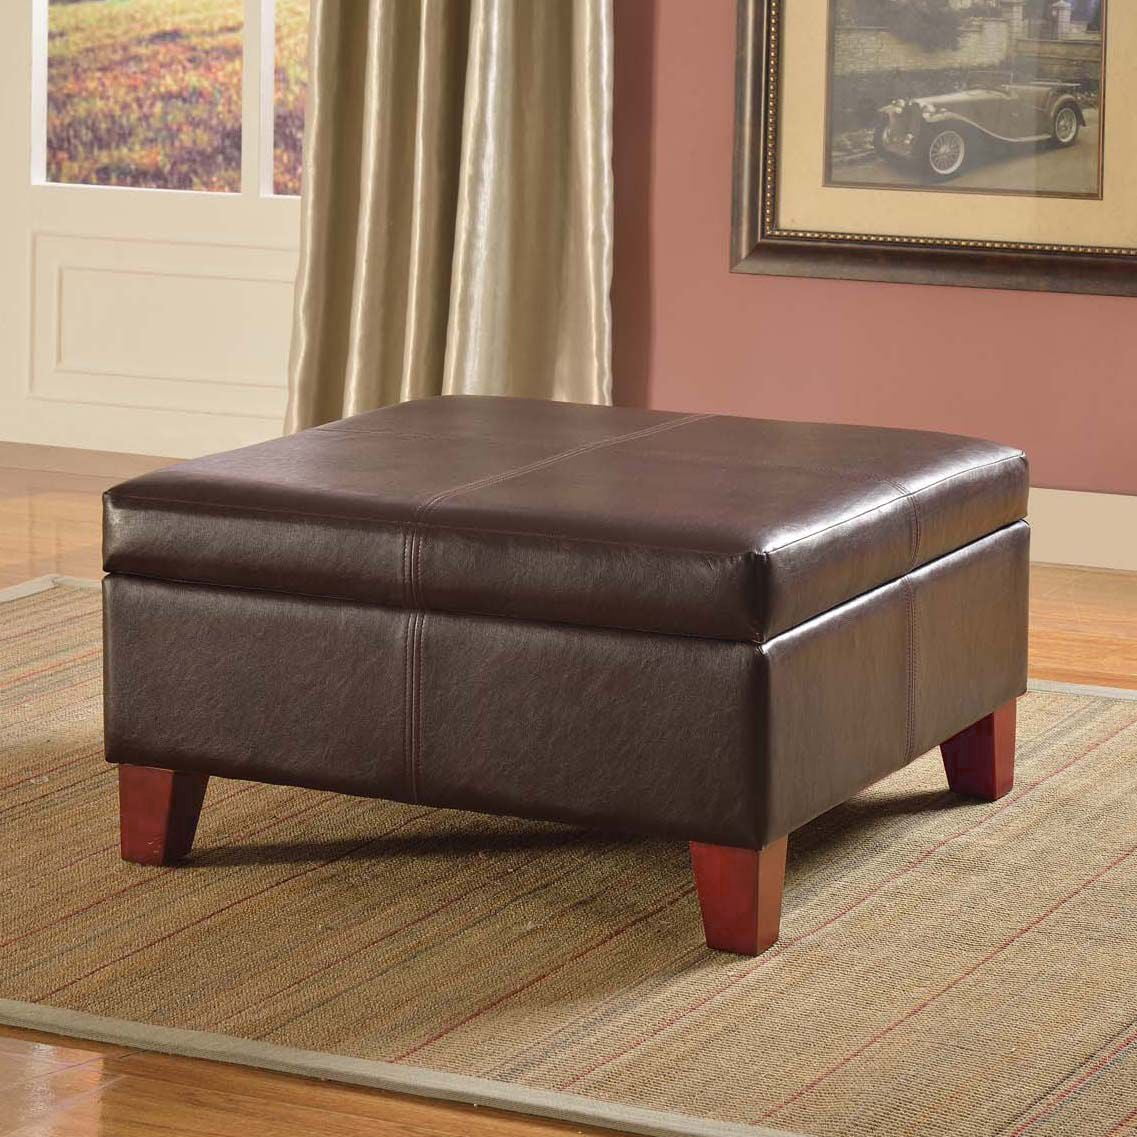 Homepop Luxury Large Faux Leather, Leather Brown Ottoman